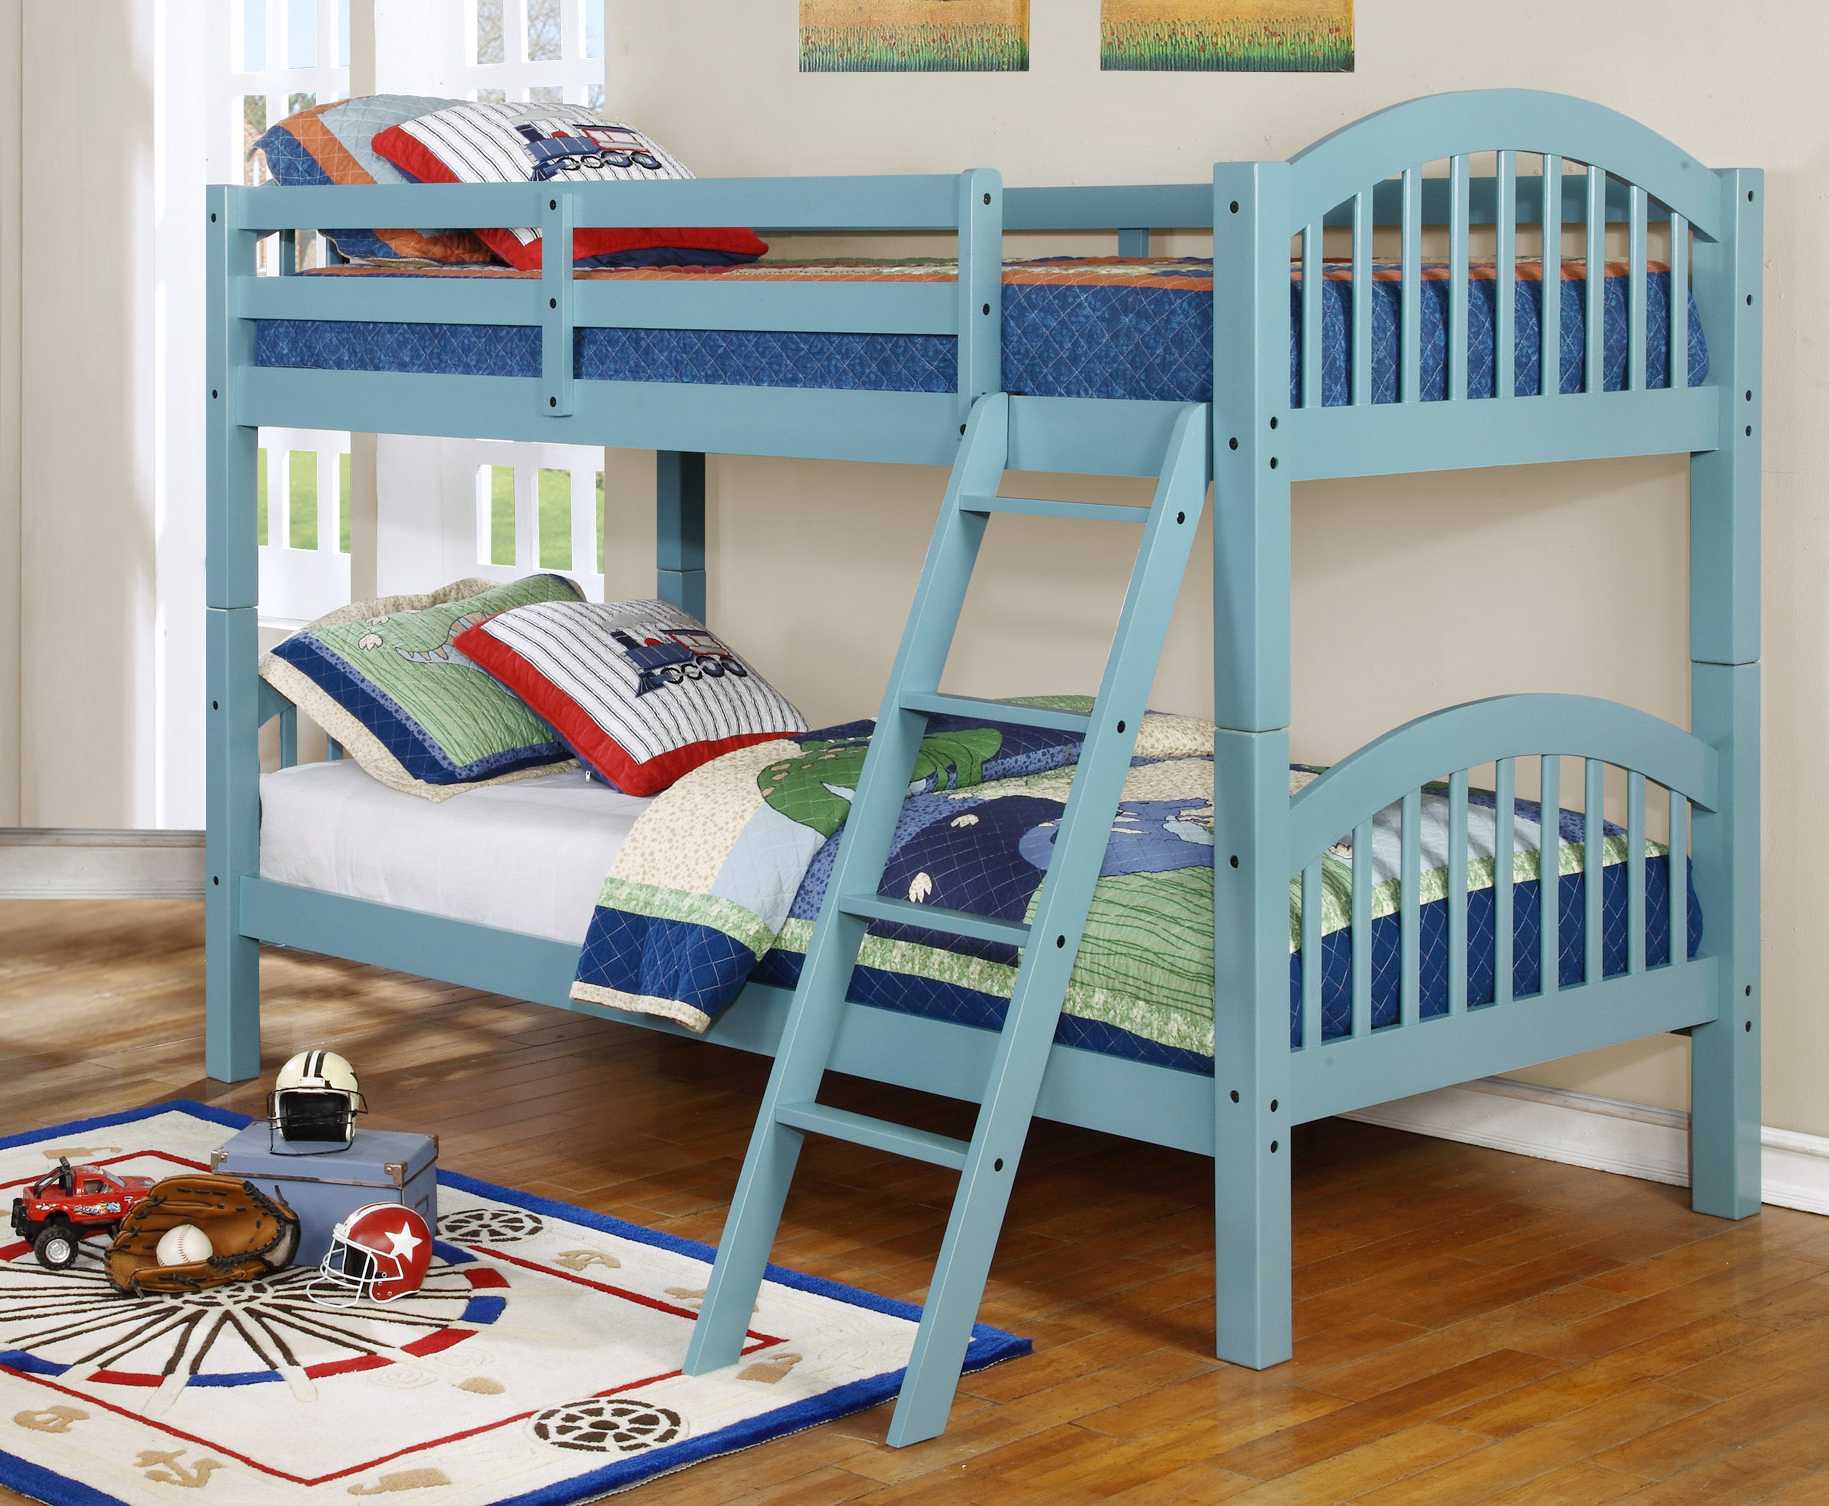 81.25" X 42.5" X 62.5" Blue Solid and Manufactured Wood Twin or Twin Arched Wood Bunk Bed